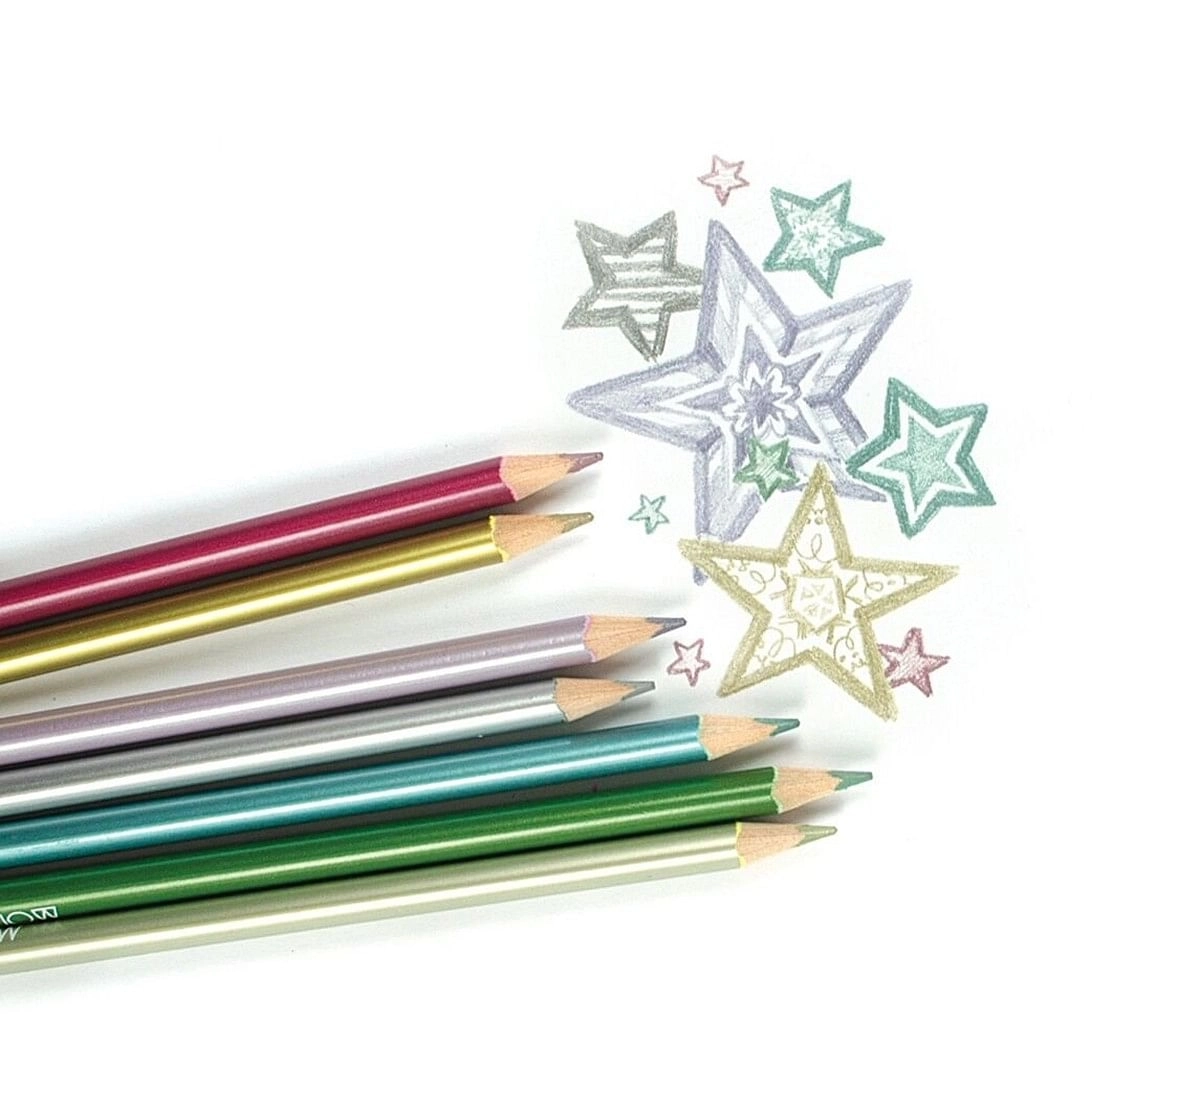 Ooly Modern Metallic Colored Pencils, Set Of 12 (128-111) School Stationery for Kids age 3Y+ 